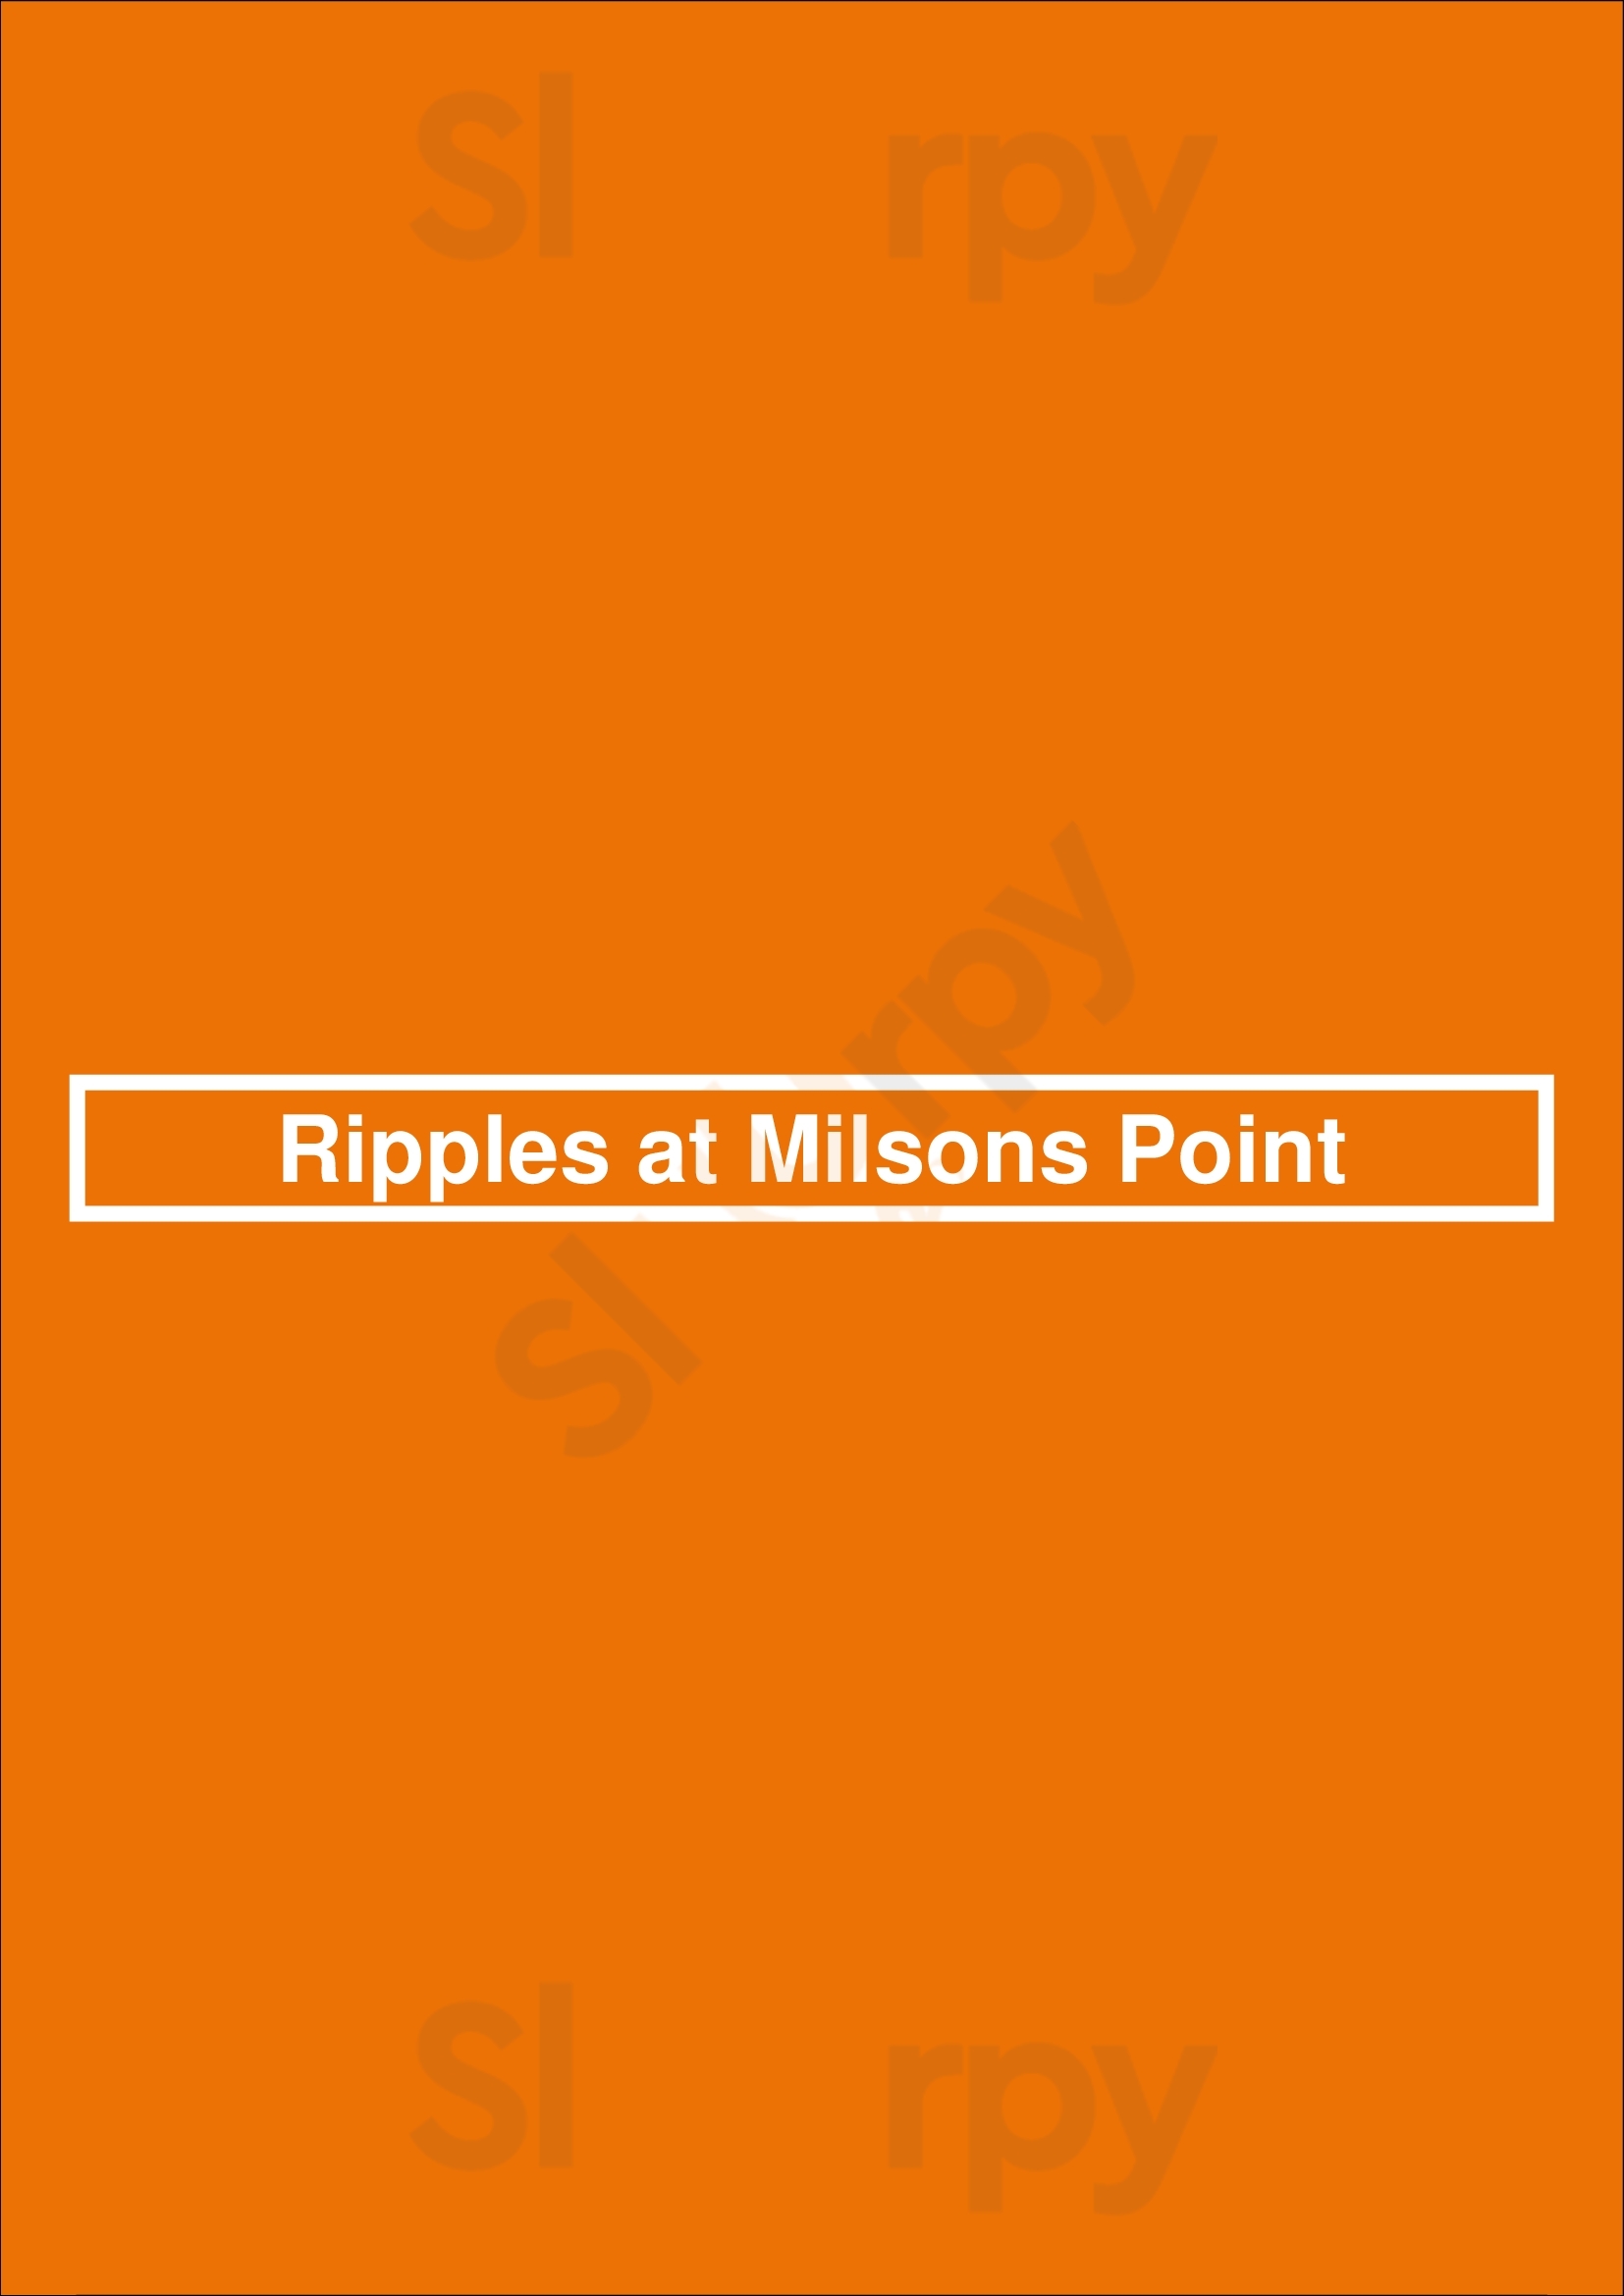 Ripples At Milsons Point Milsons Point Menu - 1